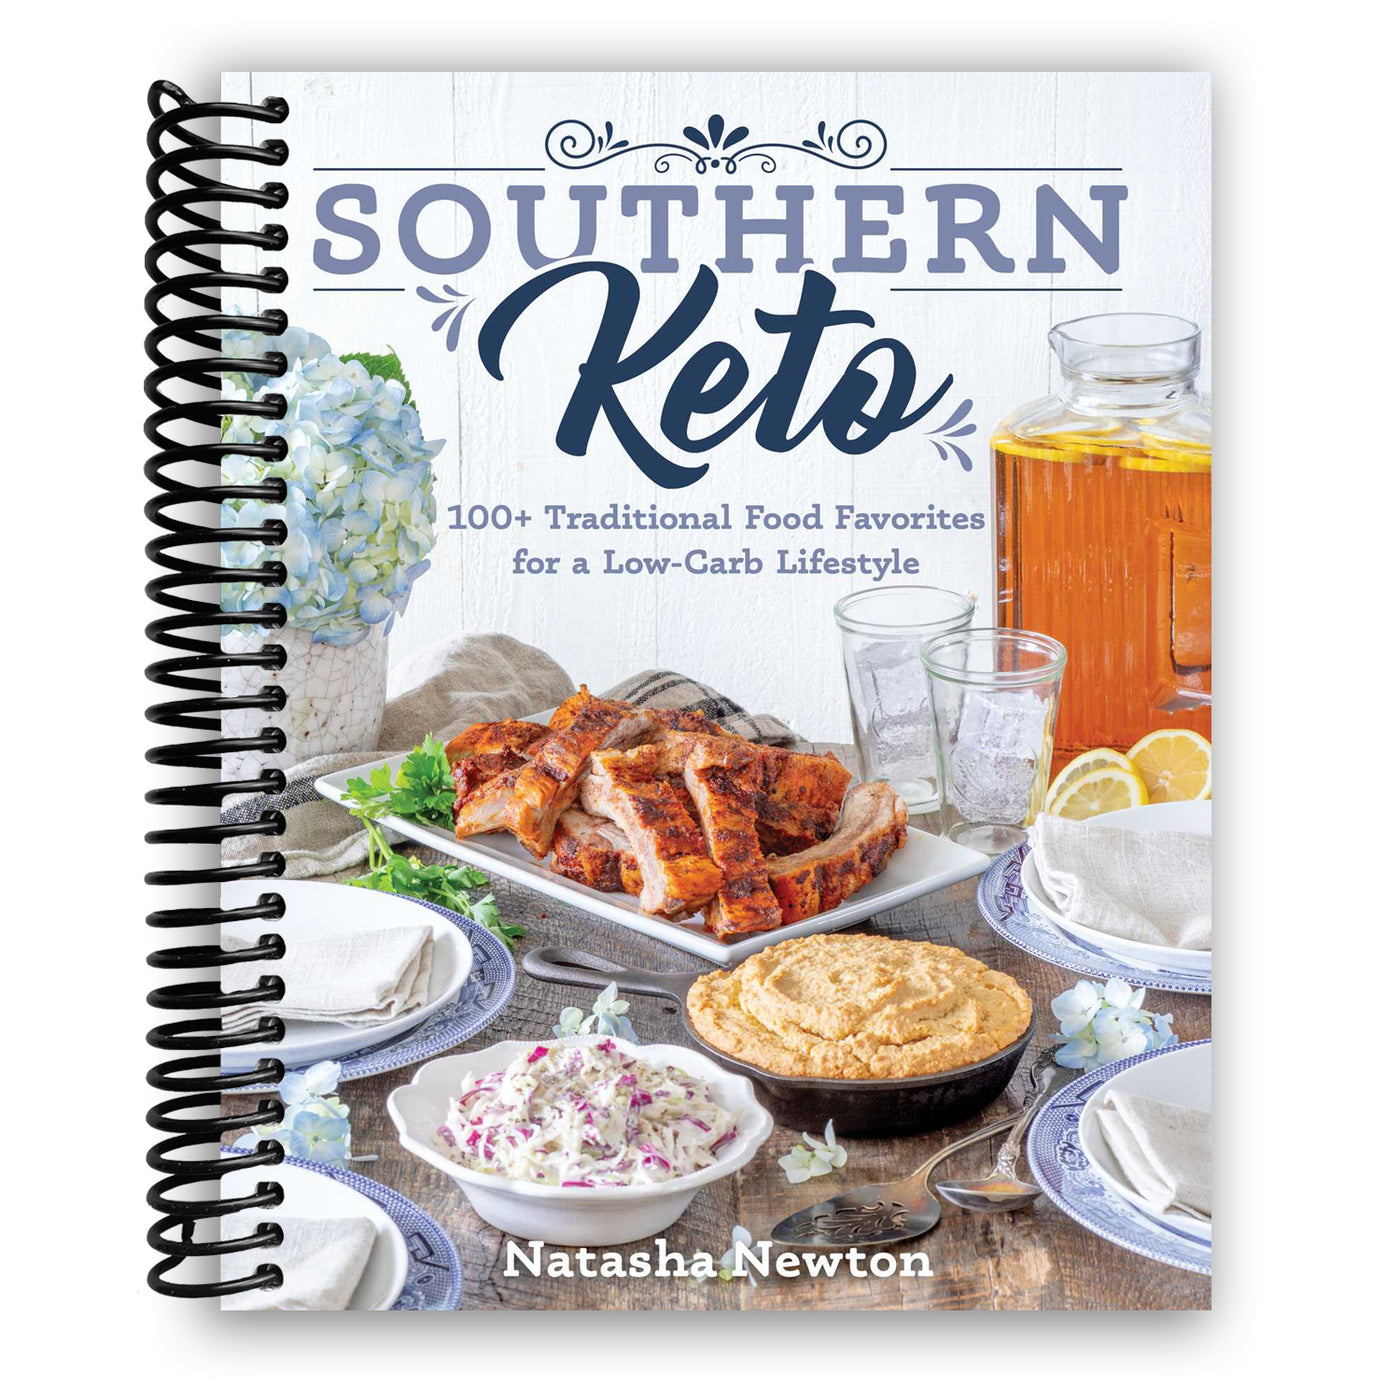 Southern Keto: 100+ Traditional Food Favorites for a Low-Carb Lifestyle (Spiral Bound)